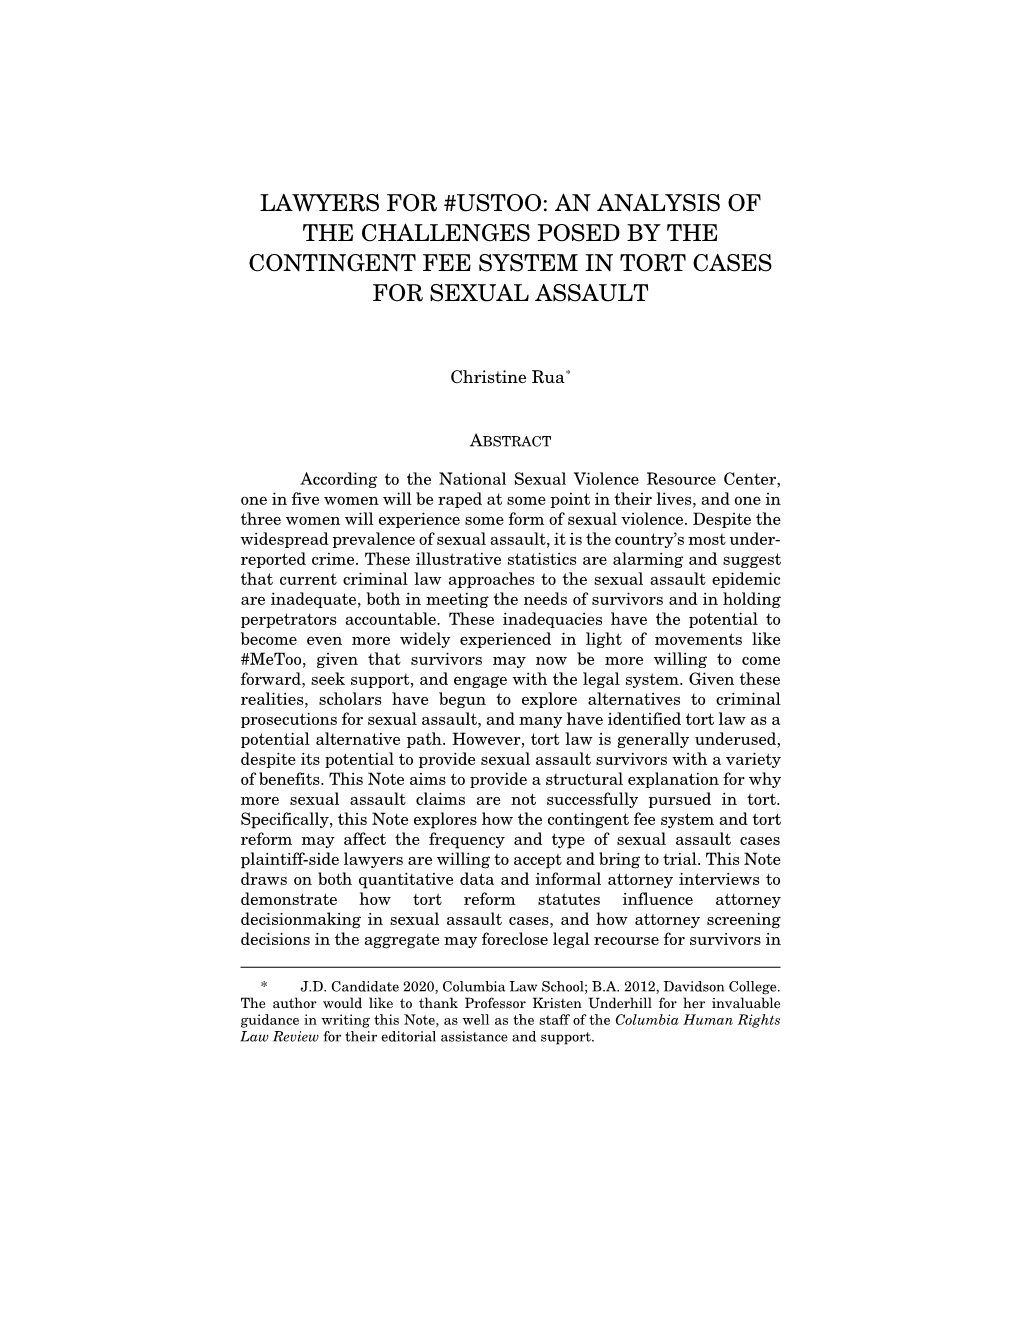 Lawyers for #Ustoo: an Analysis of the Challenges Posed by the Contingent Fee System in Tort Cases for Sexual Assault